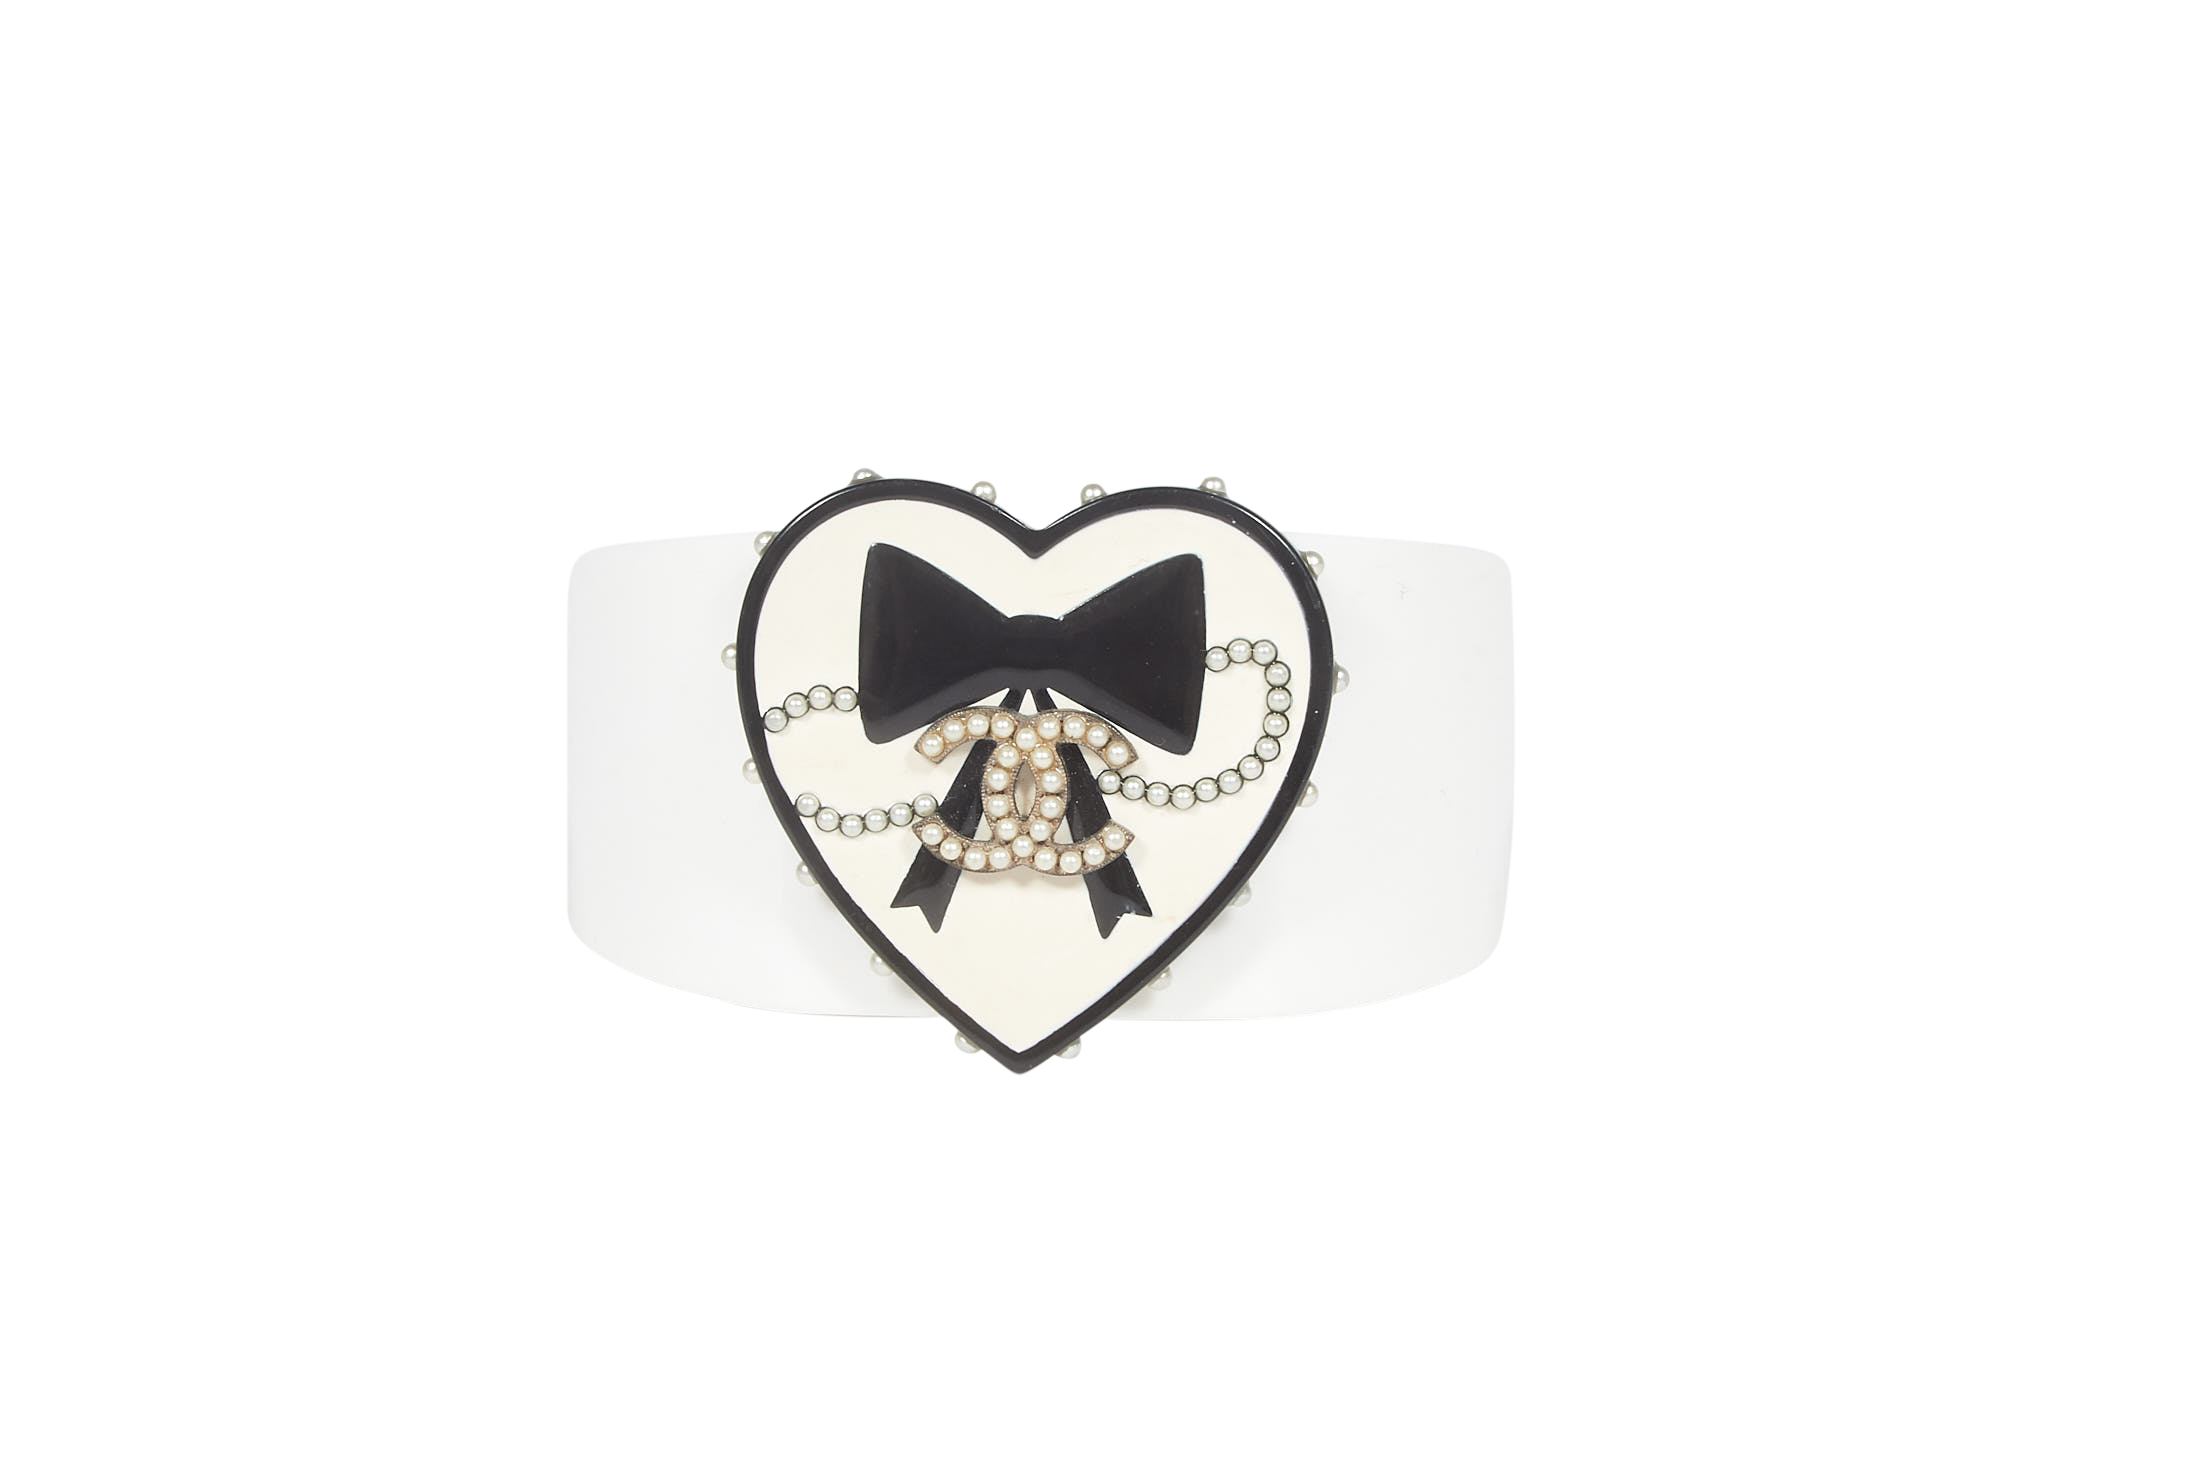 Chanel White Cuff with Black Bow - Janet Mandell